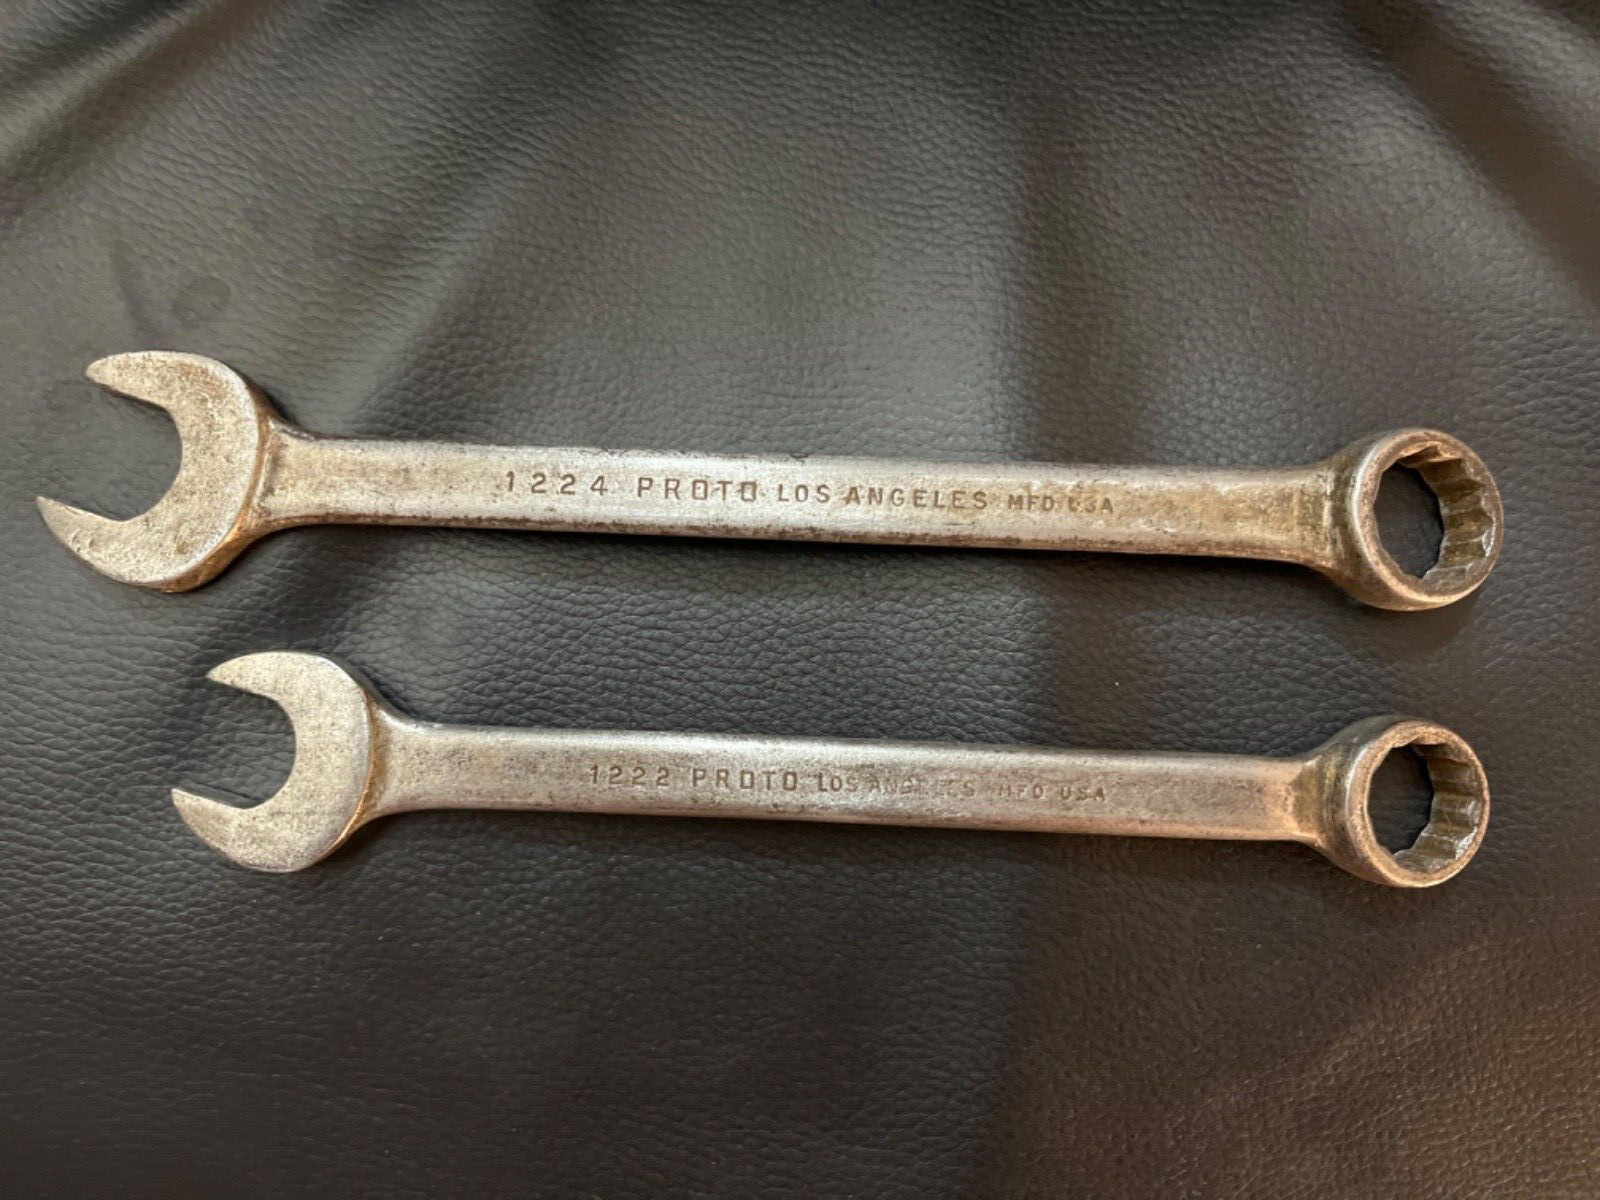 Lot Of 2 SAE PROTO Los Angeles USA Combination Wrenches 1224 3/4”-1222 11/16”